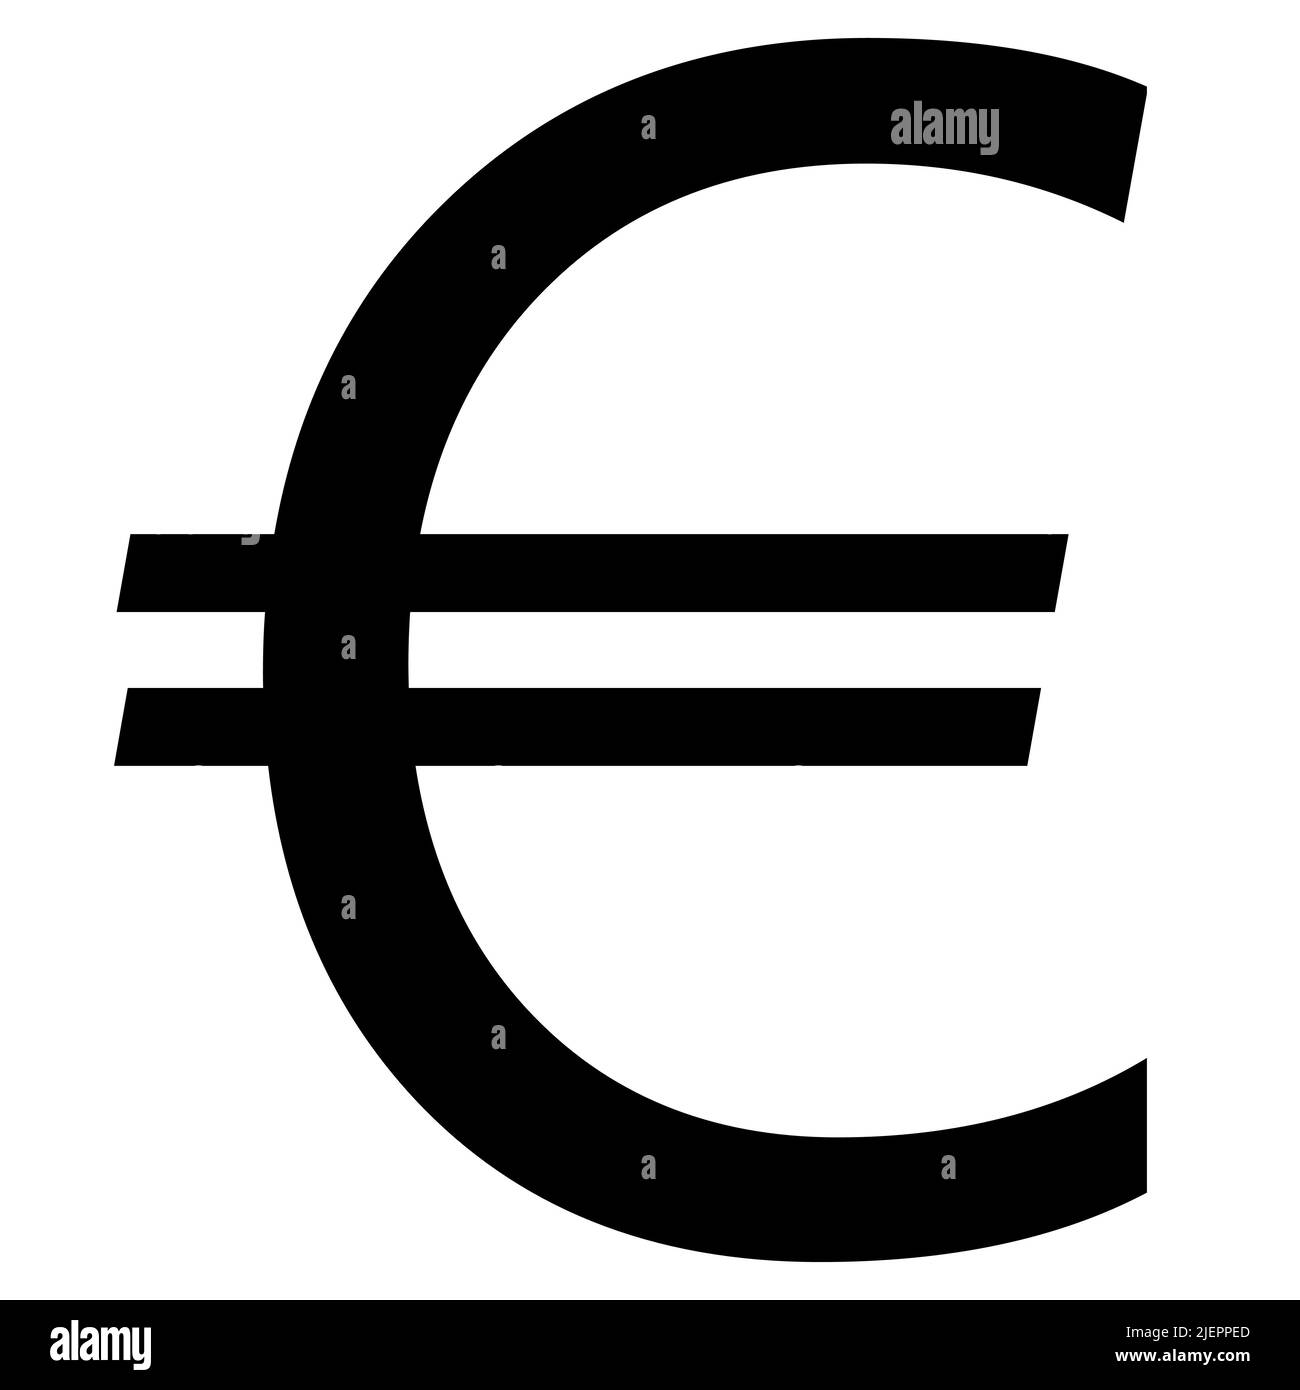 European Union Euro EUR currency sign silhouette front view isolated on white background. Currency by the European Central Bank. Vector illustration. Stock Vector